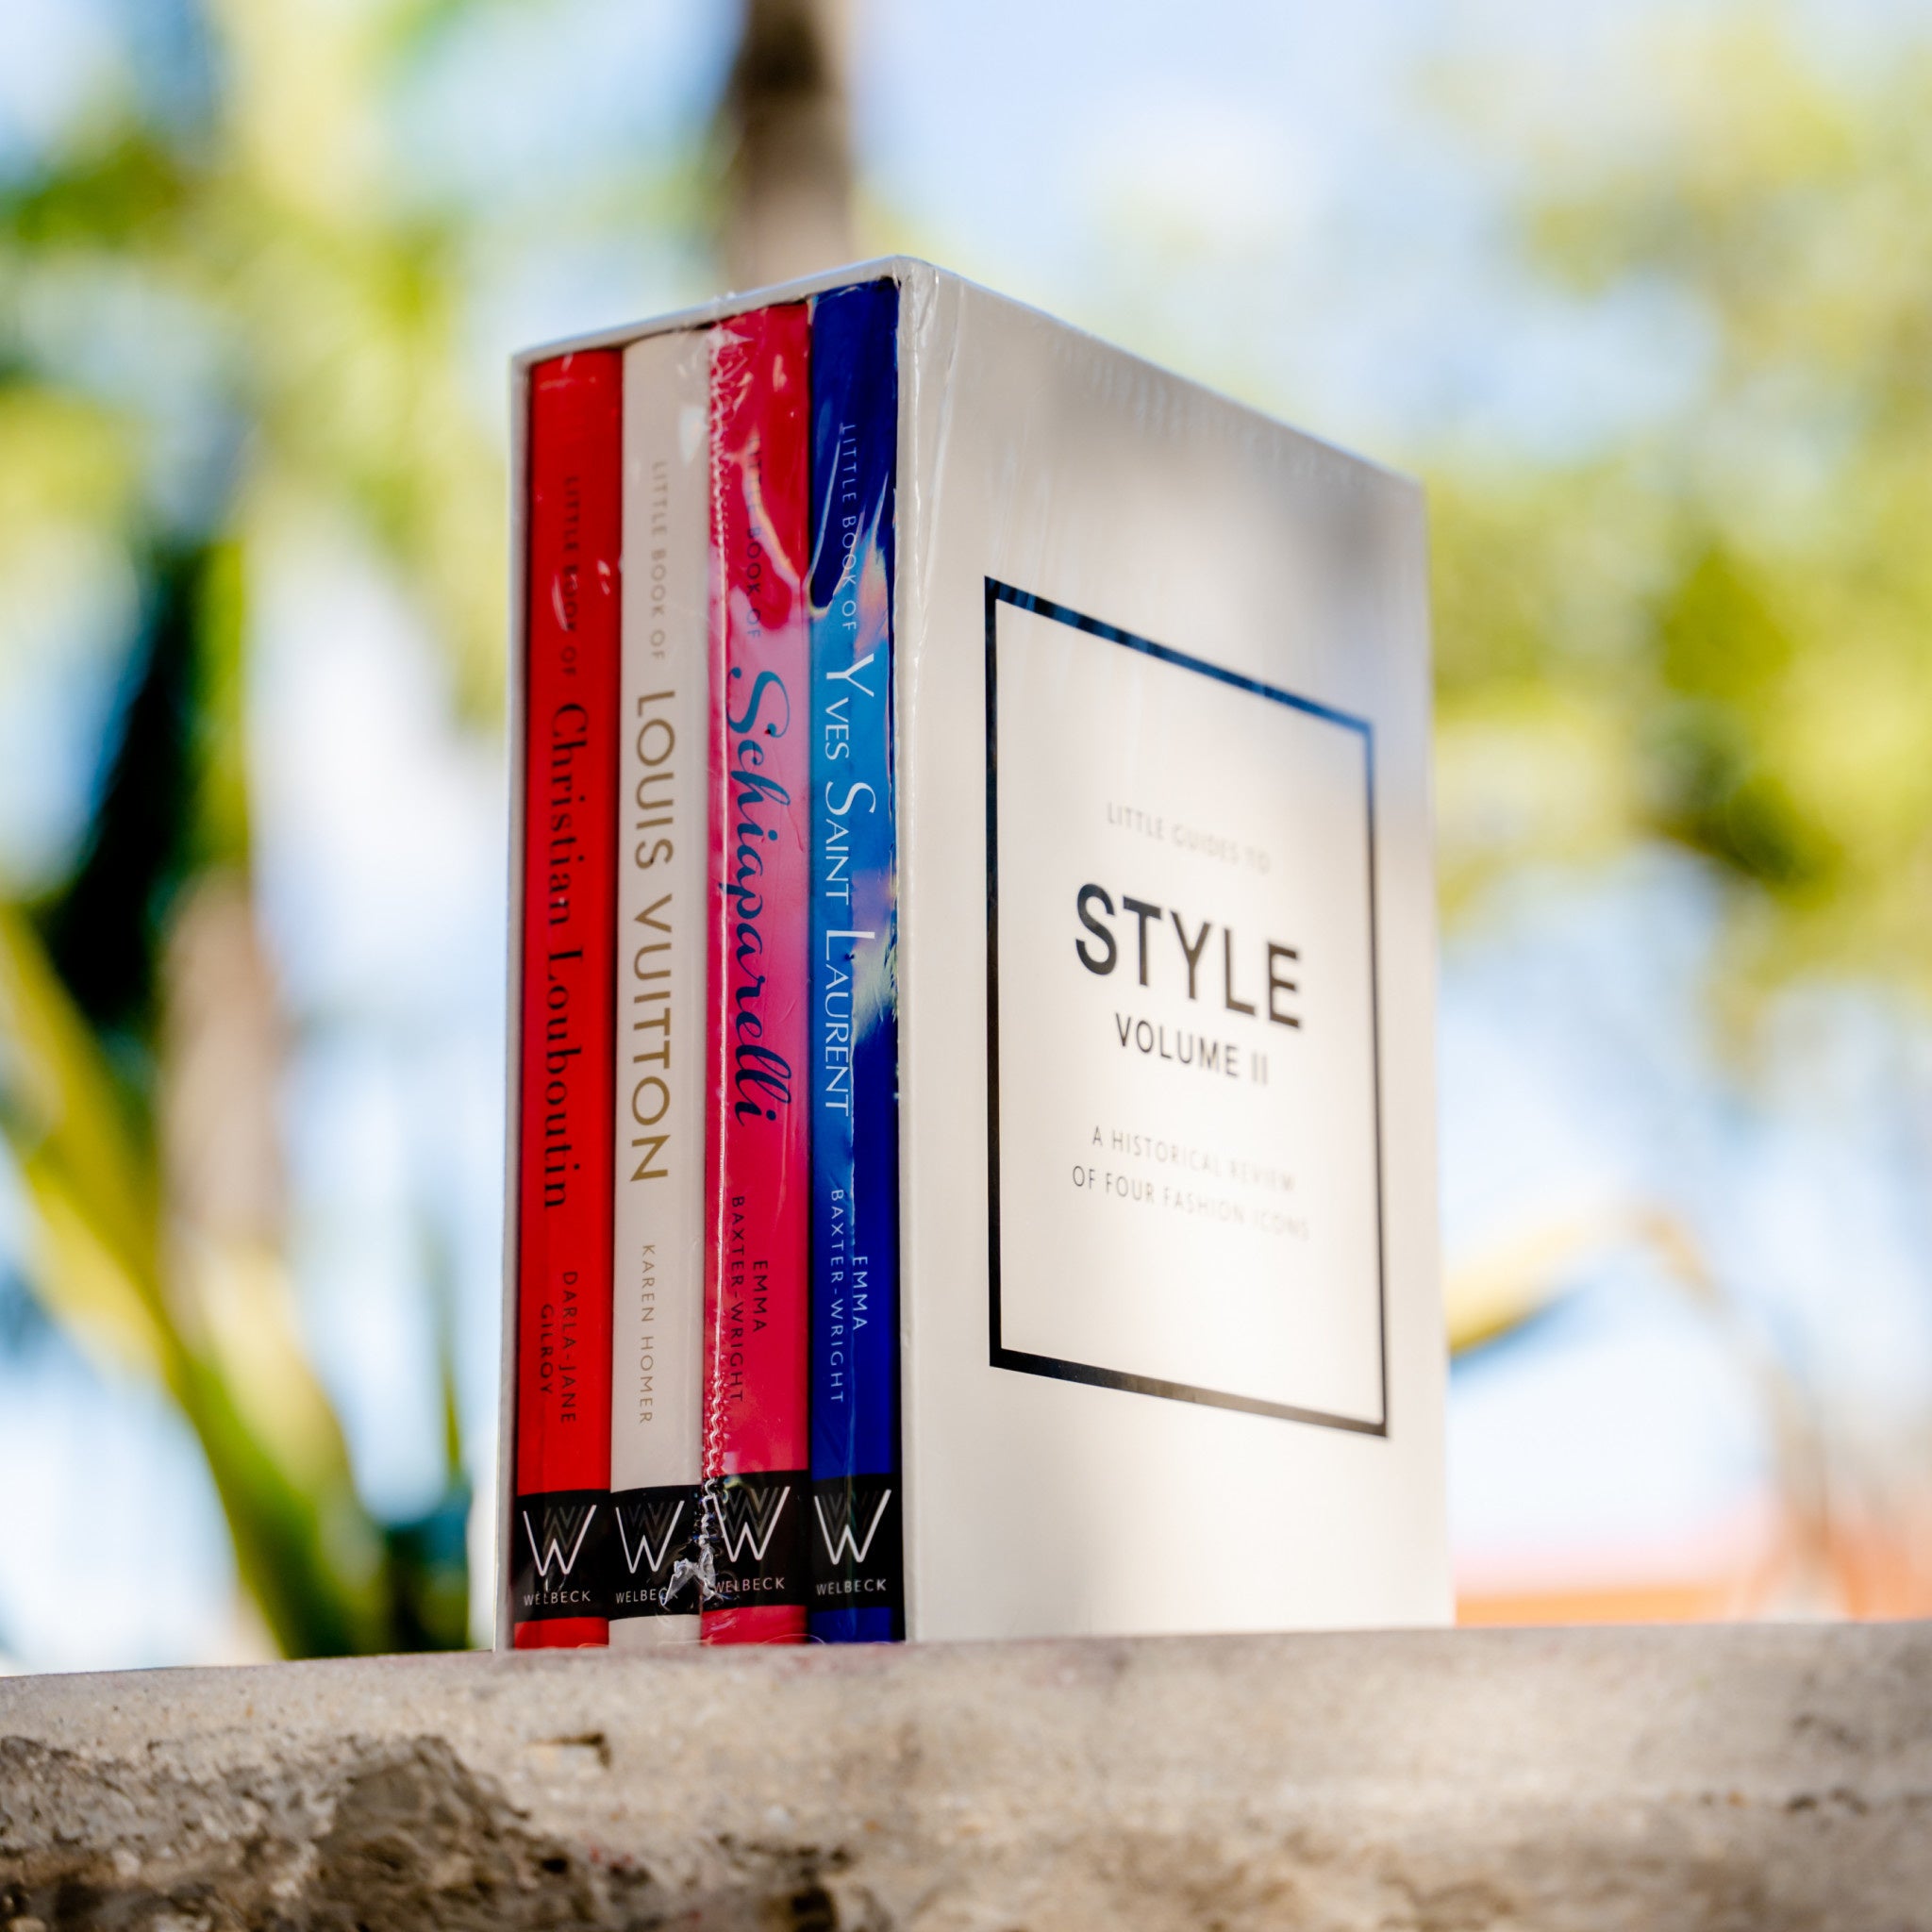 Little Guides to Style: The Story of Four Iconic Fashion Houses [Book]